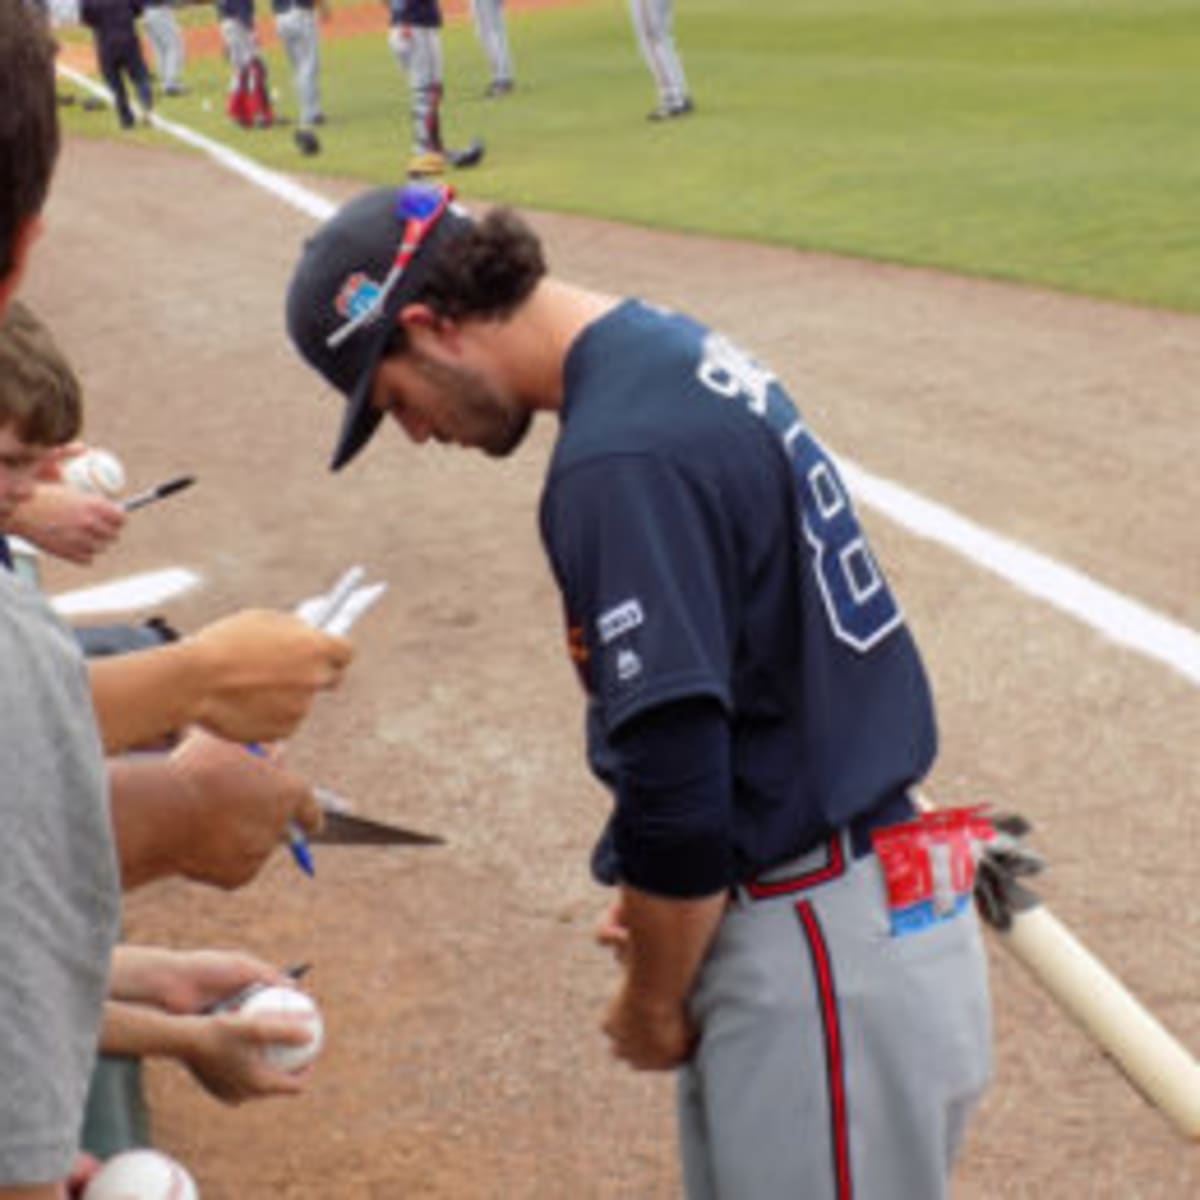 Collectors can obtain many player autographs at spring training